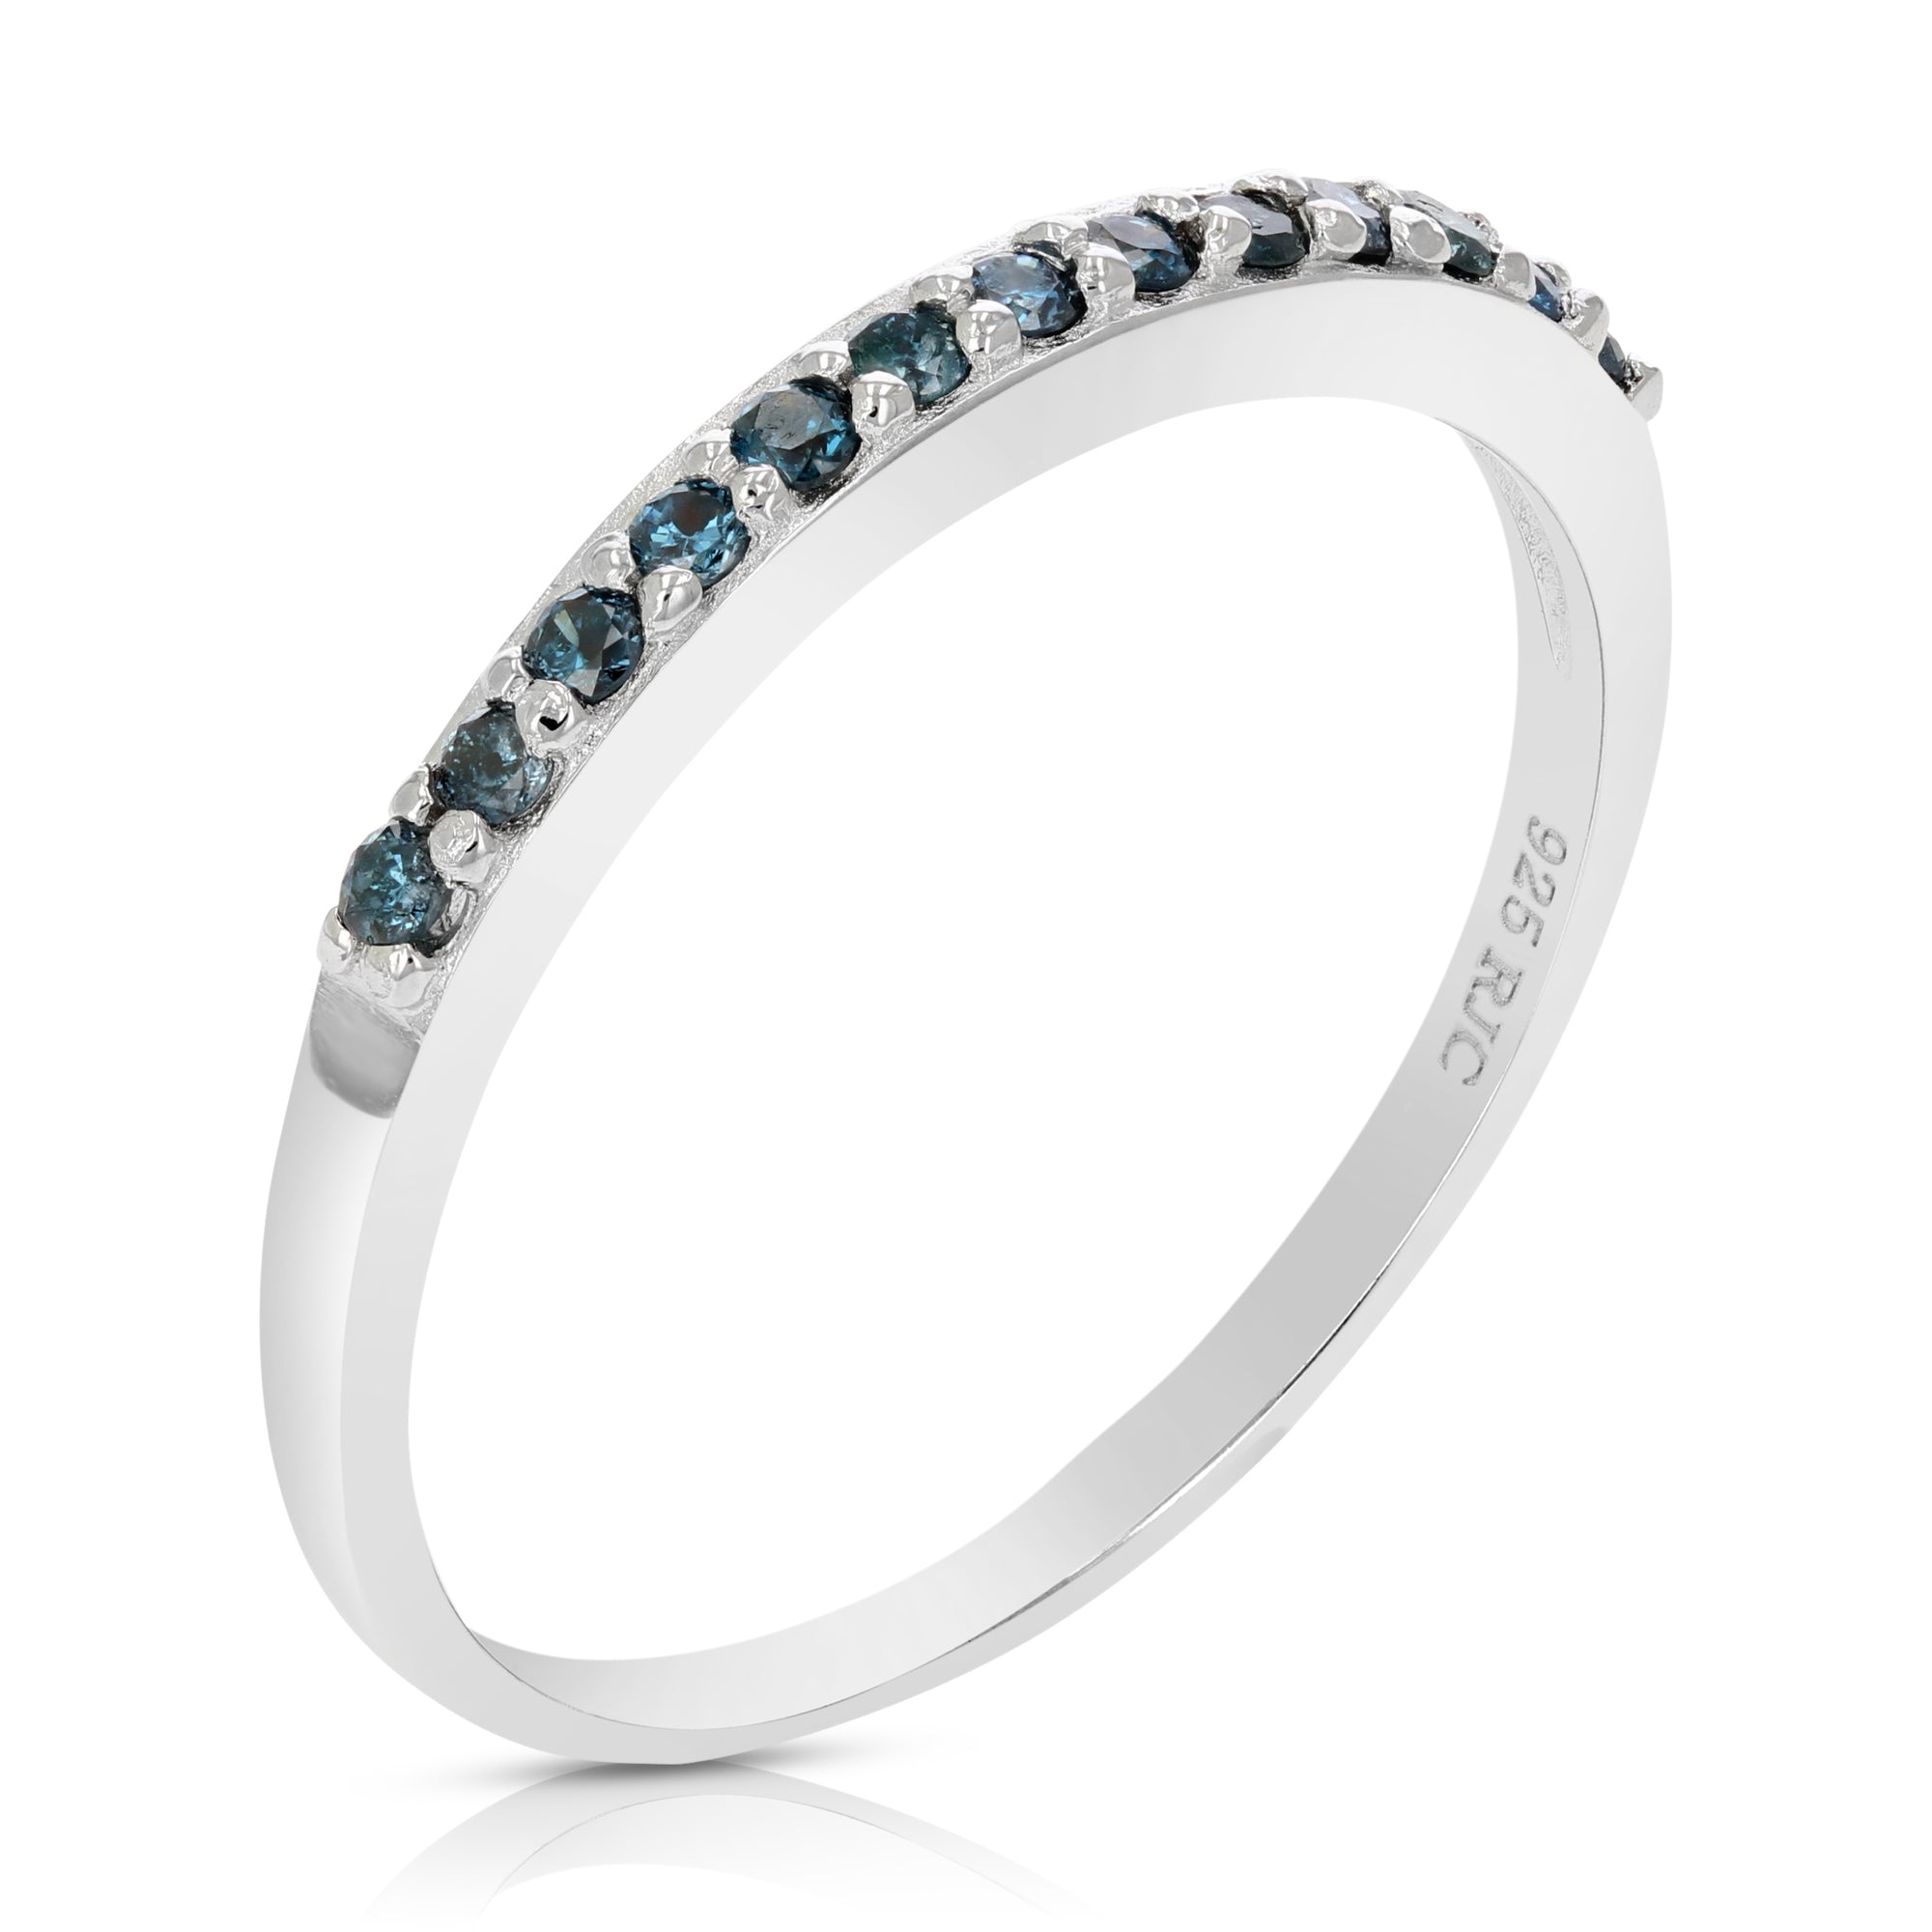 1/6 cttw Blue Diamond Ring Wedding Band in .925 Sterling Silver 13 Stones Round